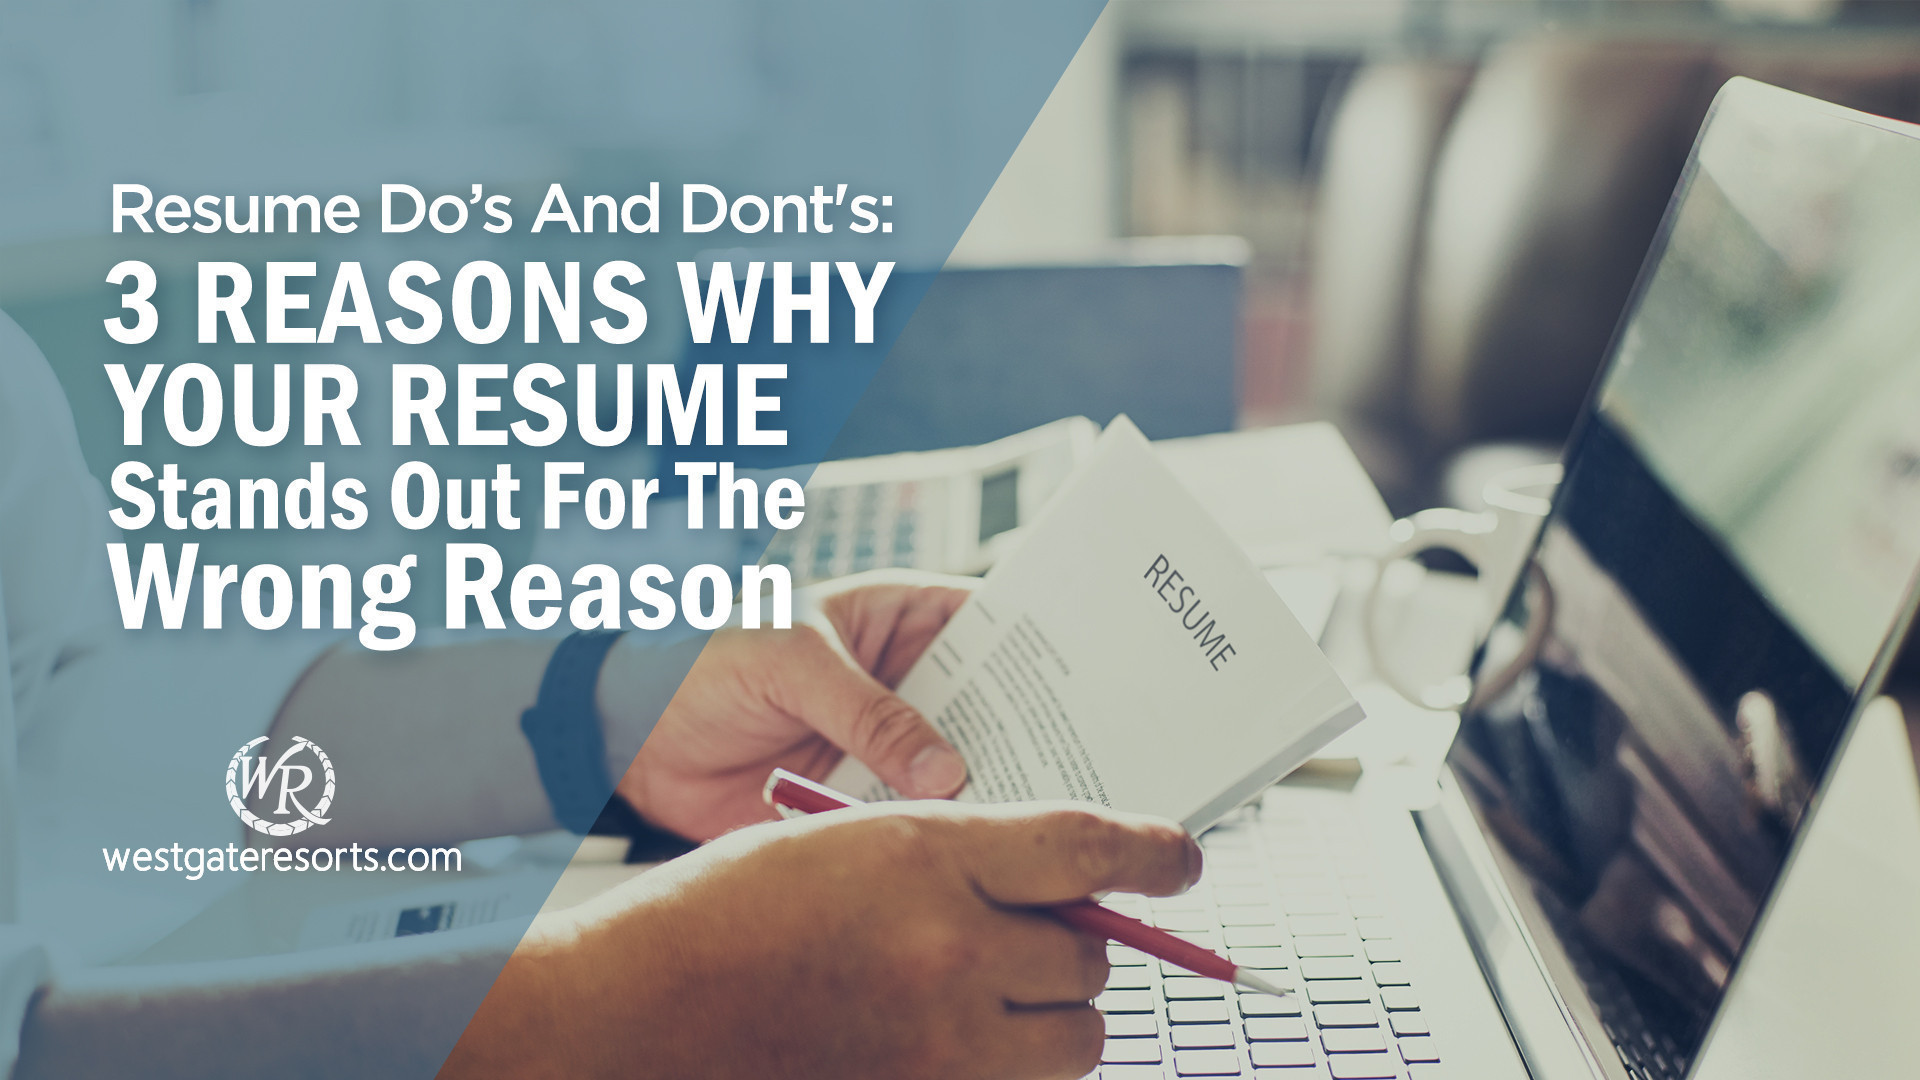 Redoing Your Resume | 3 Reasons Why Your Resume Stands Out For the Wrong Reason | Westgate Travel Careers